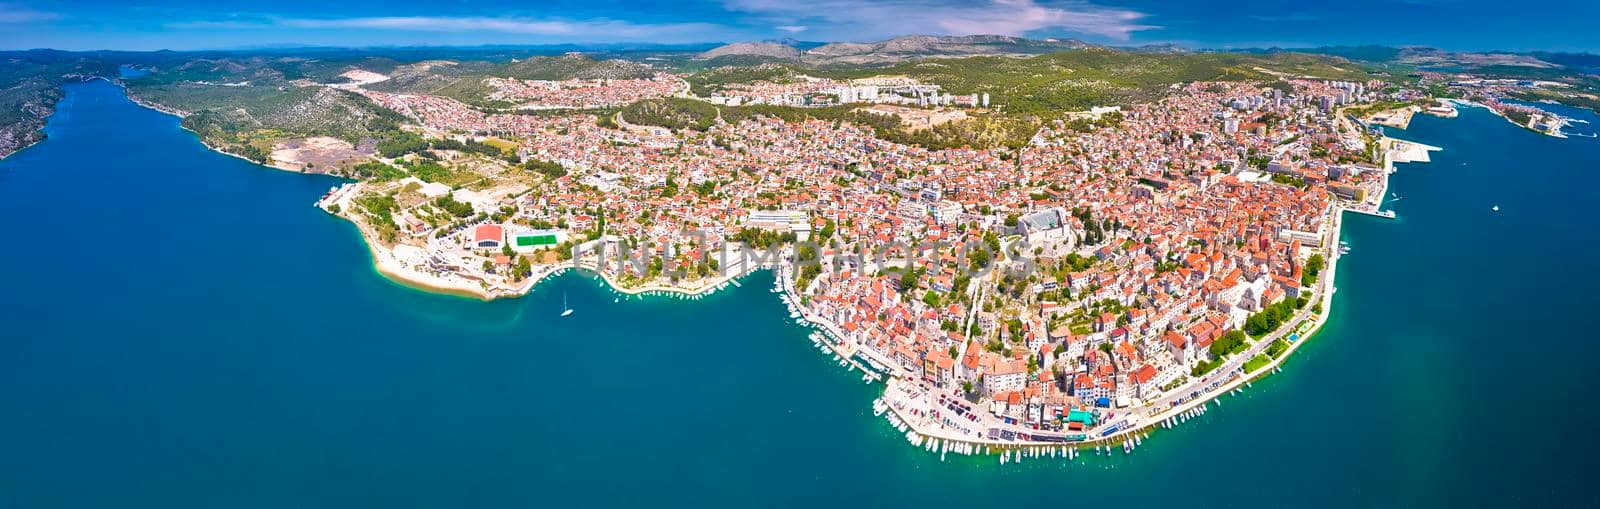 Town of Sibenik waterfront aerial panoramic view by xbrchx